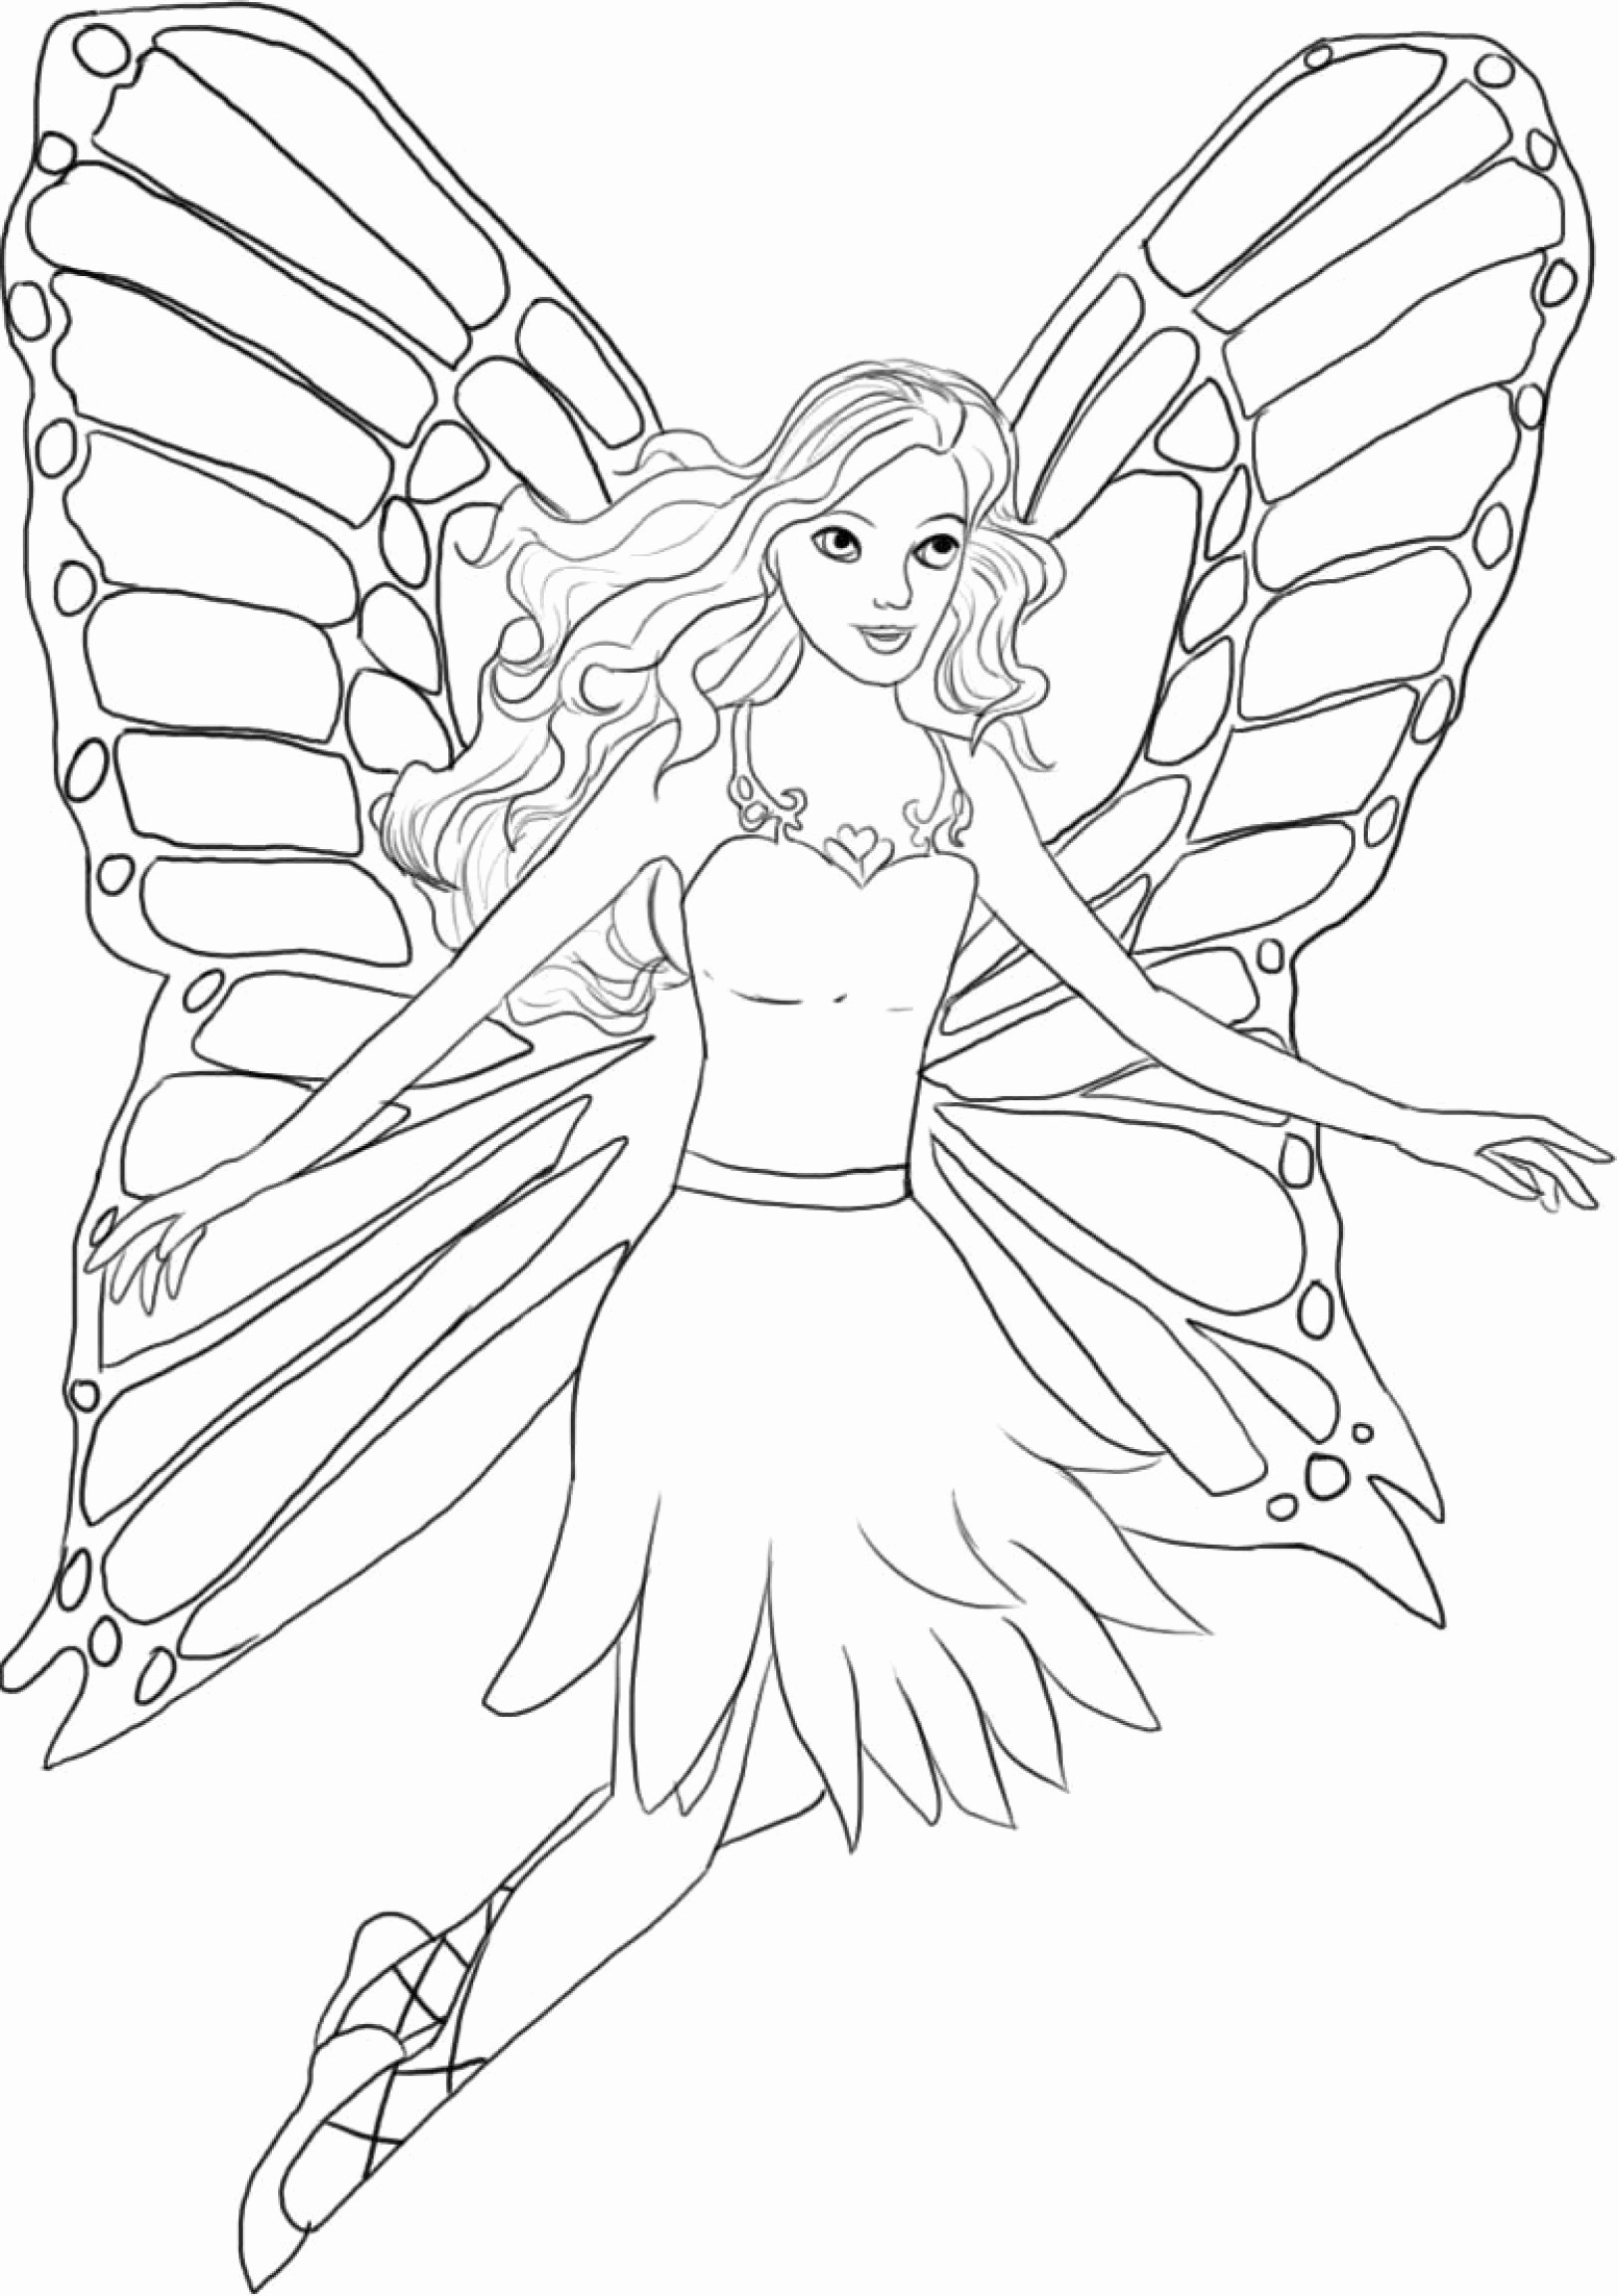 colouring-pages-of-princesses-and-fairies-of-colouring-pages-of-princesses-and-fairies Colouring Pages Of Princesses and Fairies Cartoon 